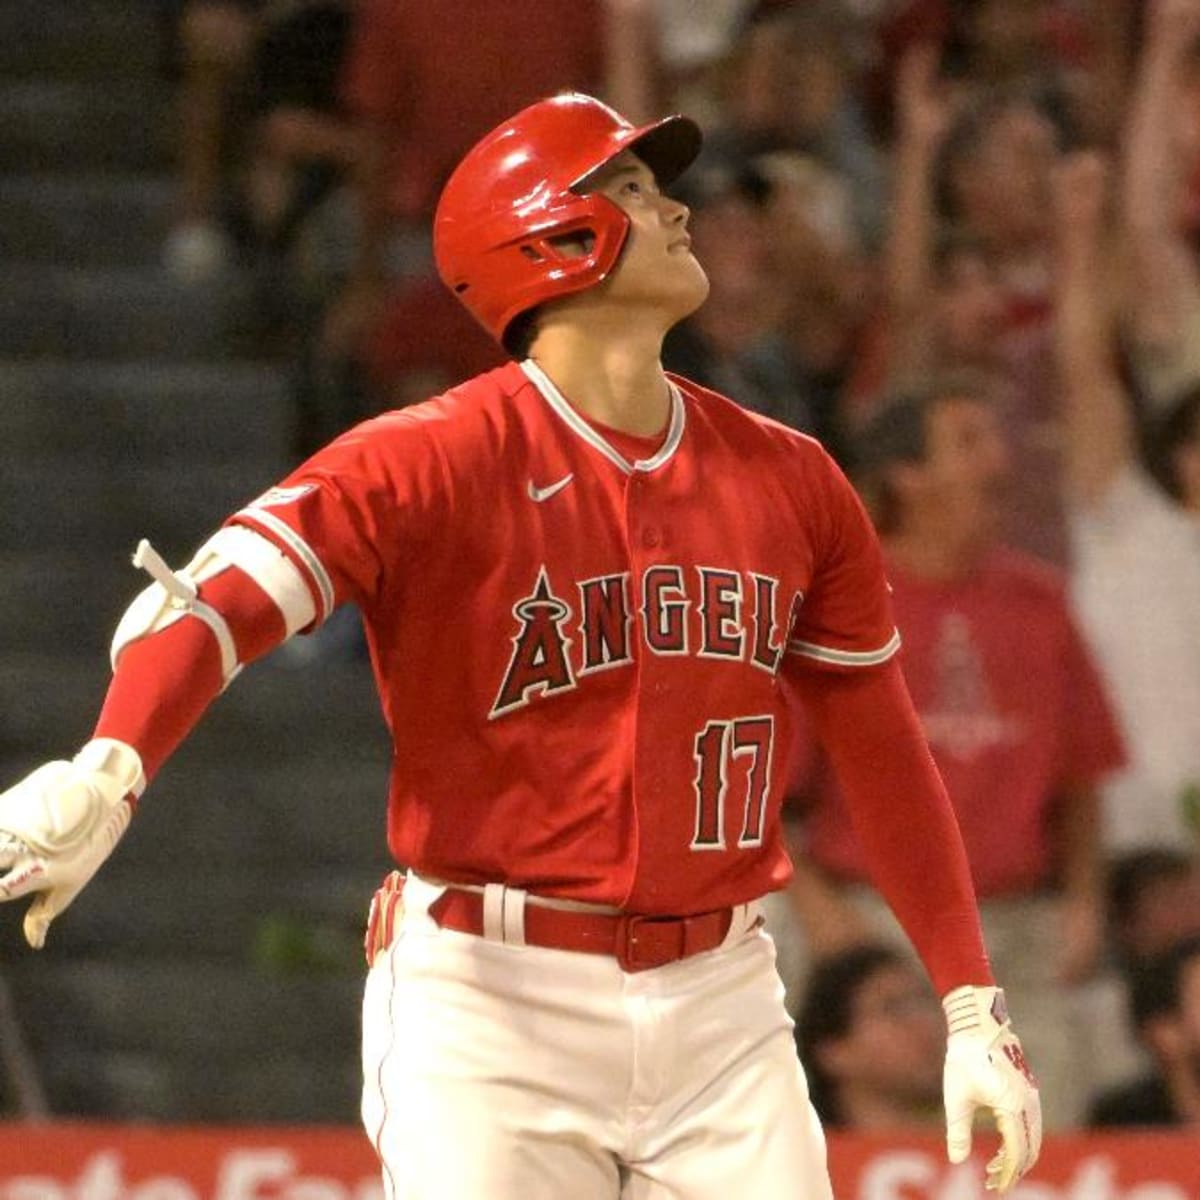 Ohtani helps send Mets into last place as Angels win 3-1 - ABC News